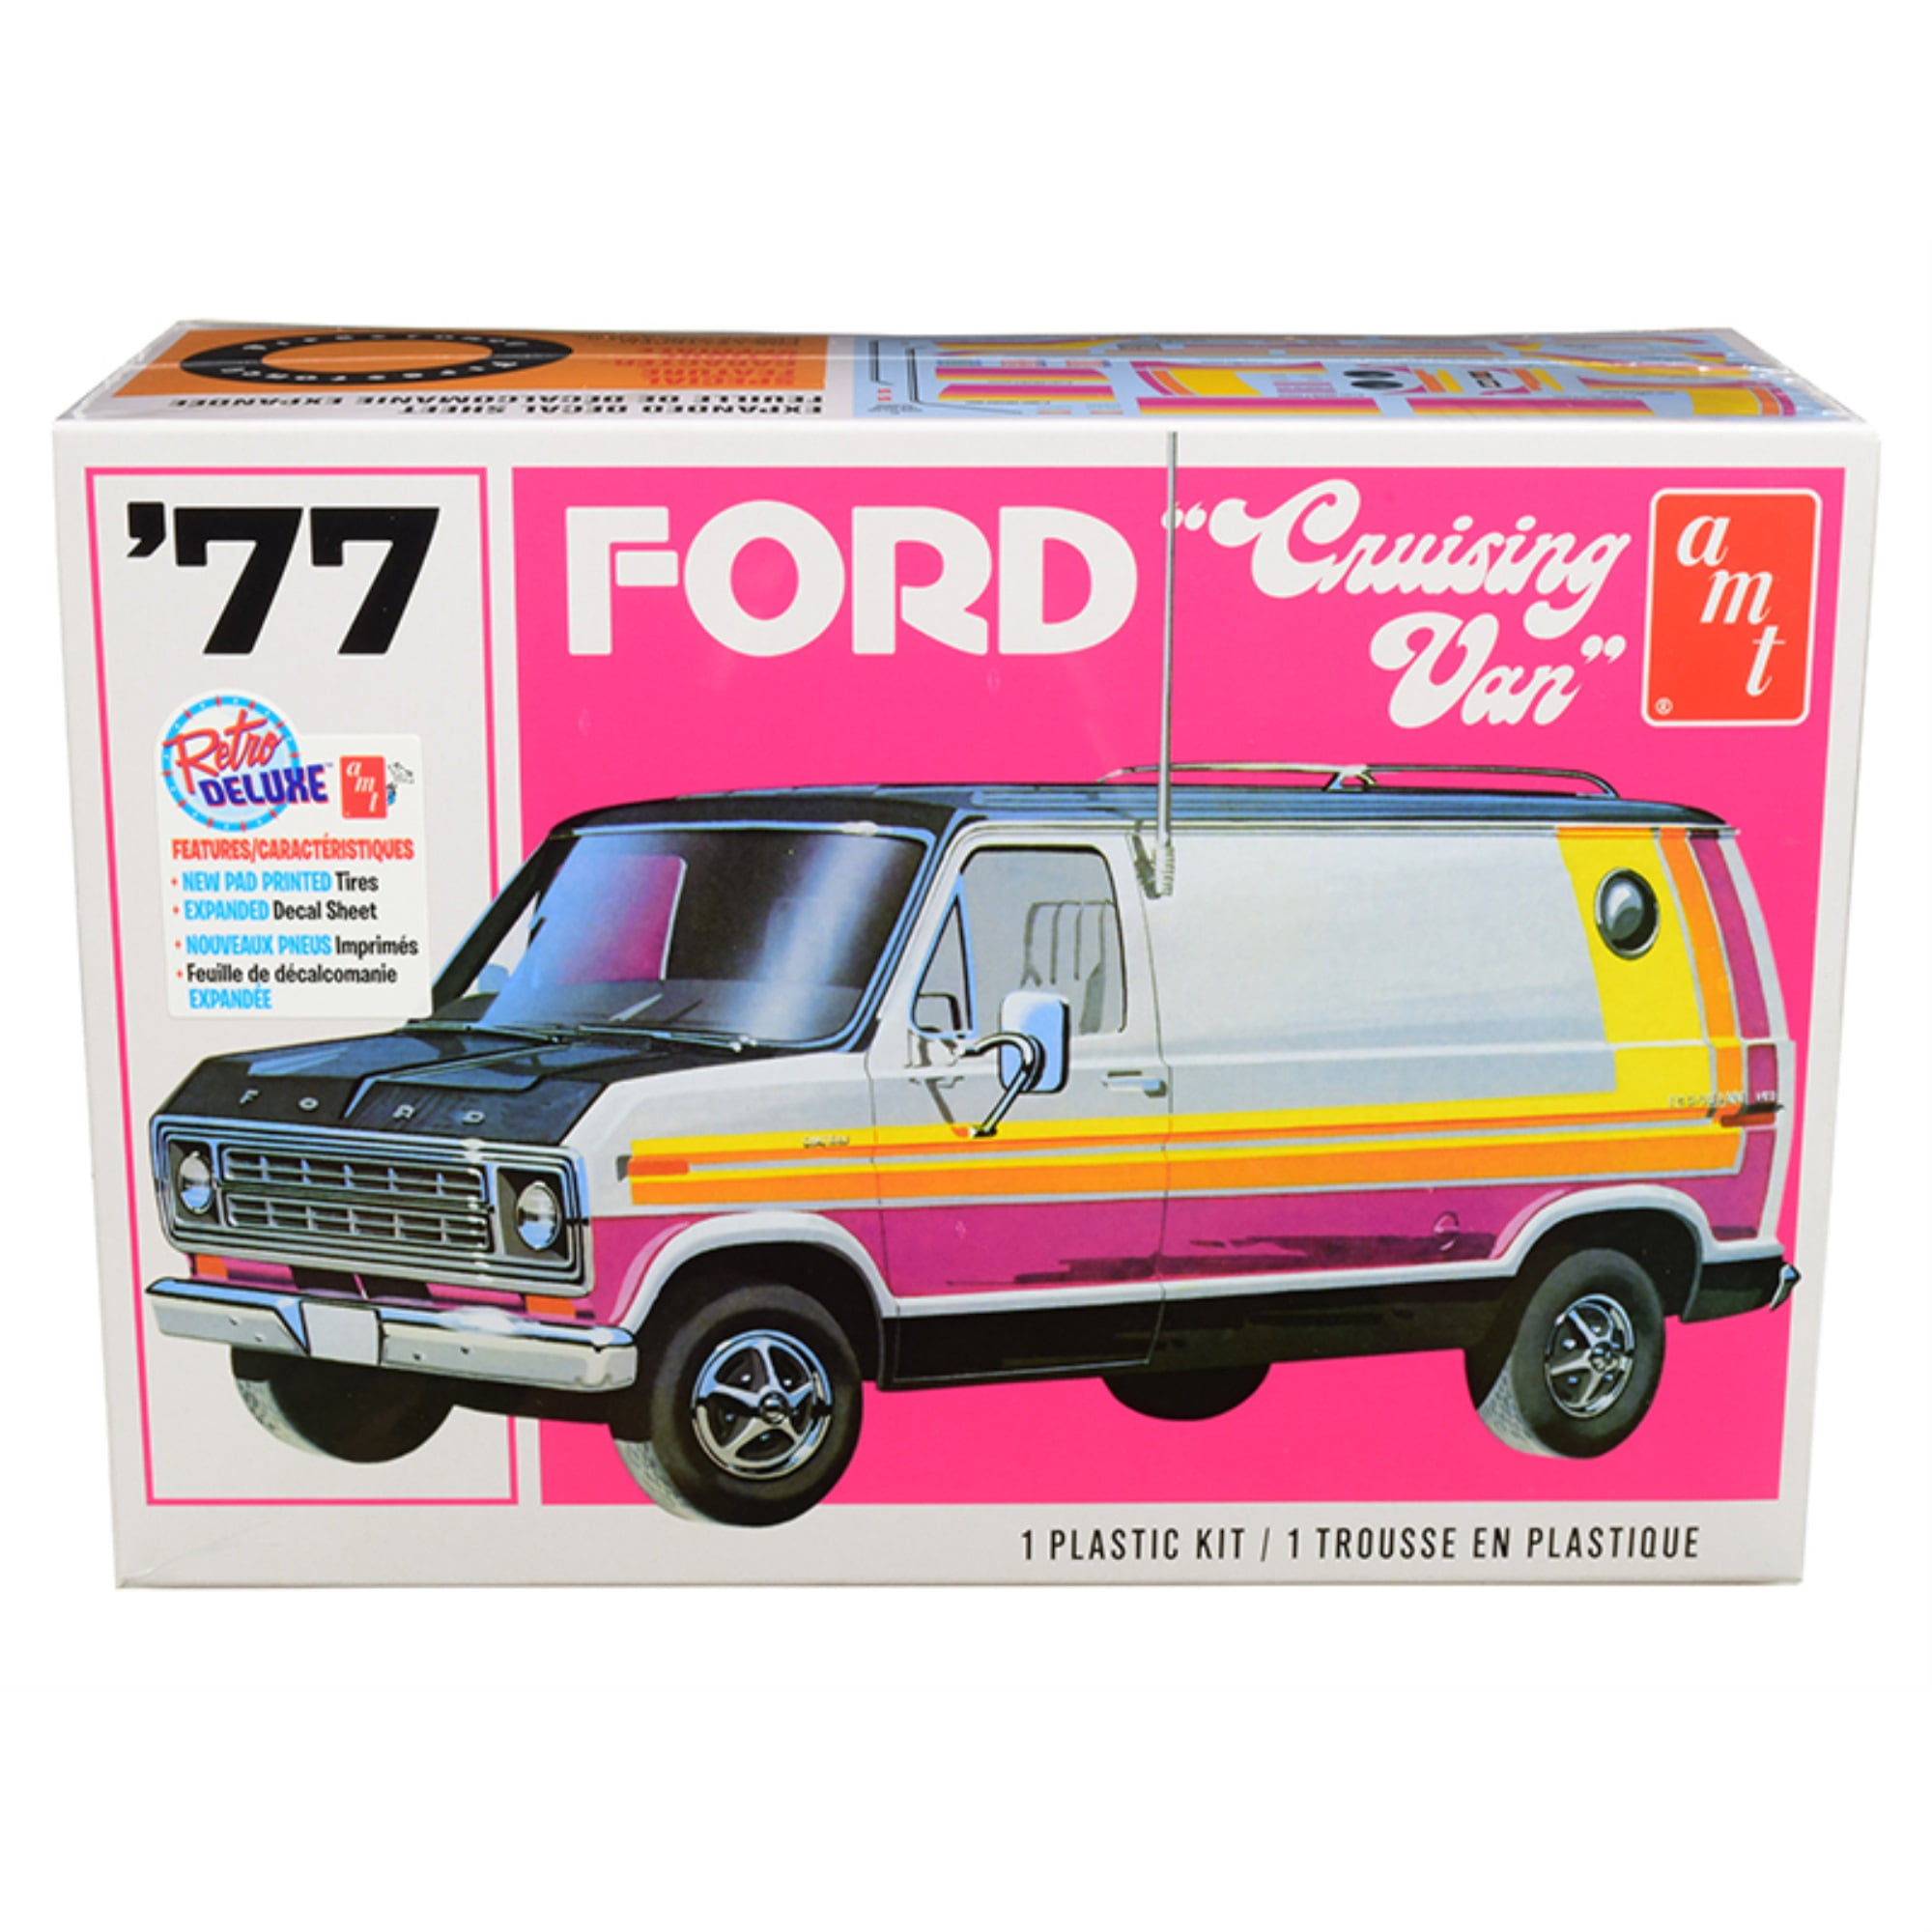 Picture of AMT AMT1108M Skill 2 Model Kit 1977 Ford Cruising Van 1 by 25 Scale Model